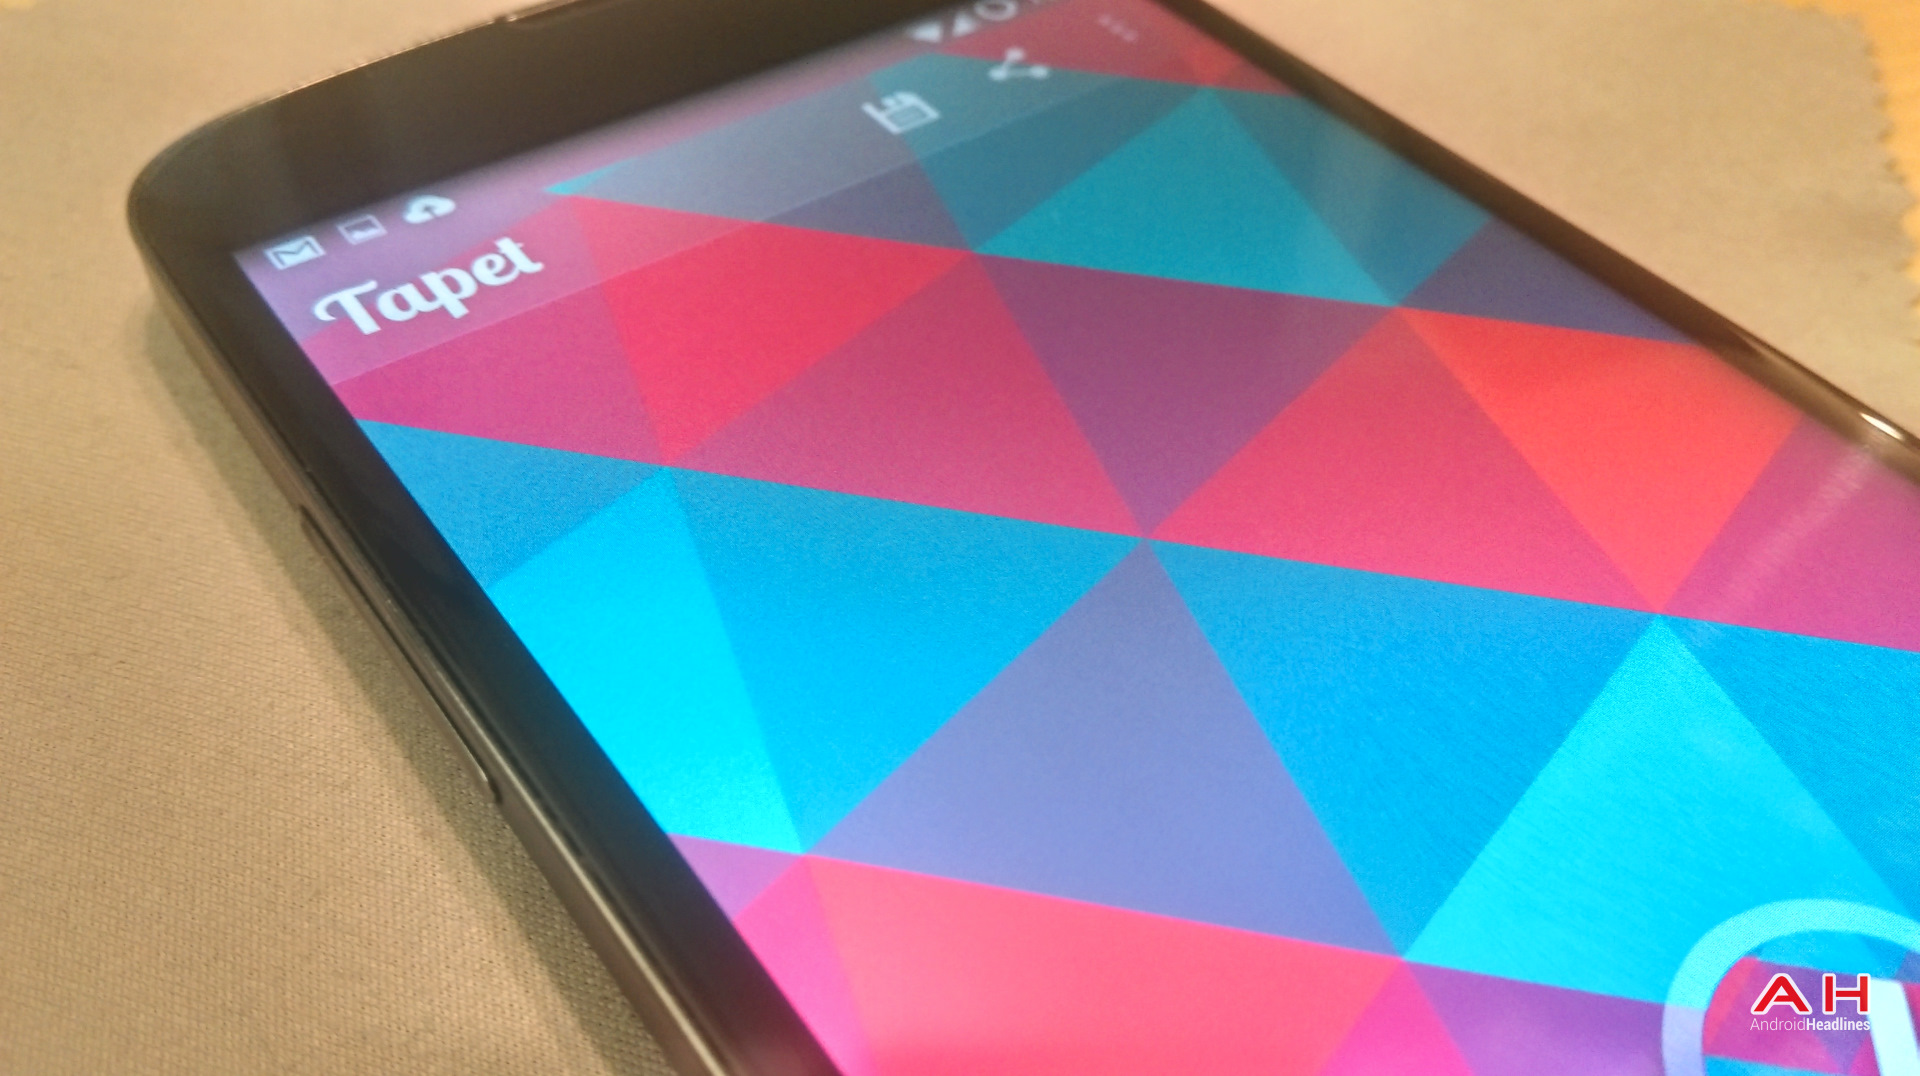 Tapet HD Material Wallpaper Gives Your Homescreen A Design